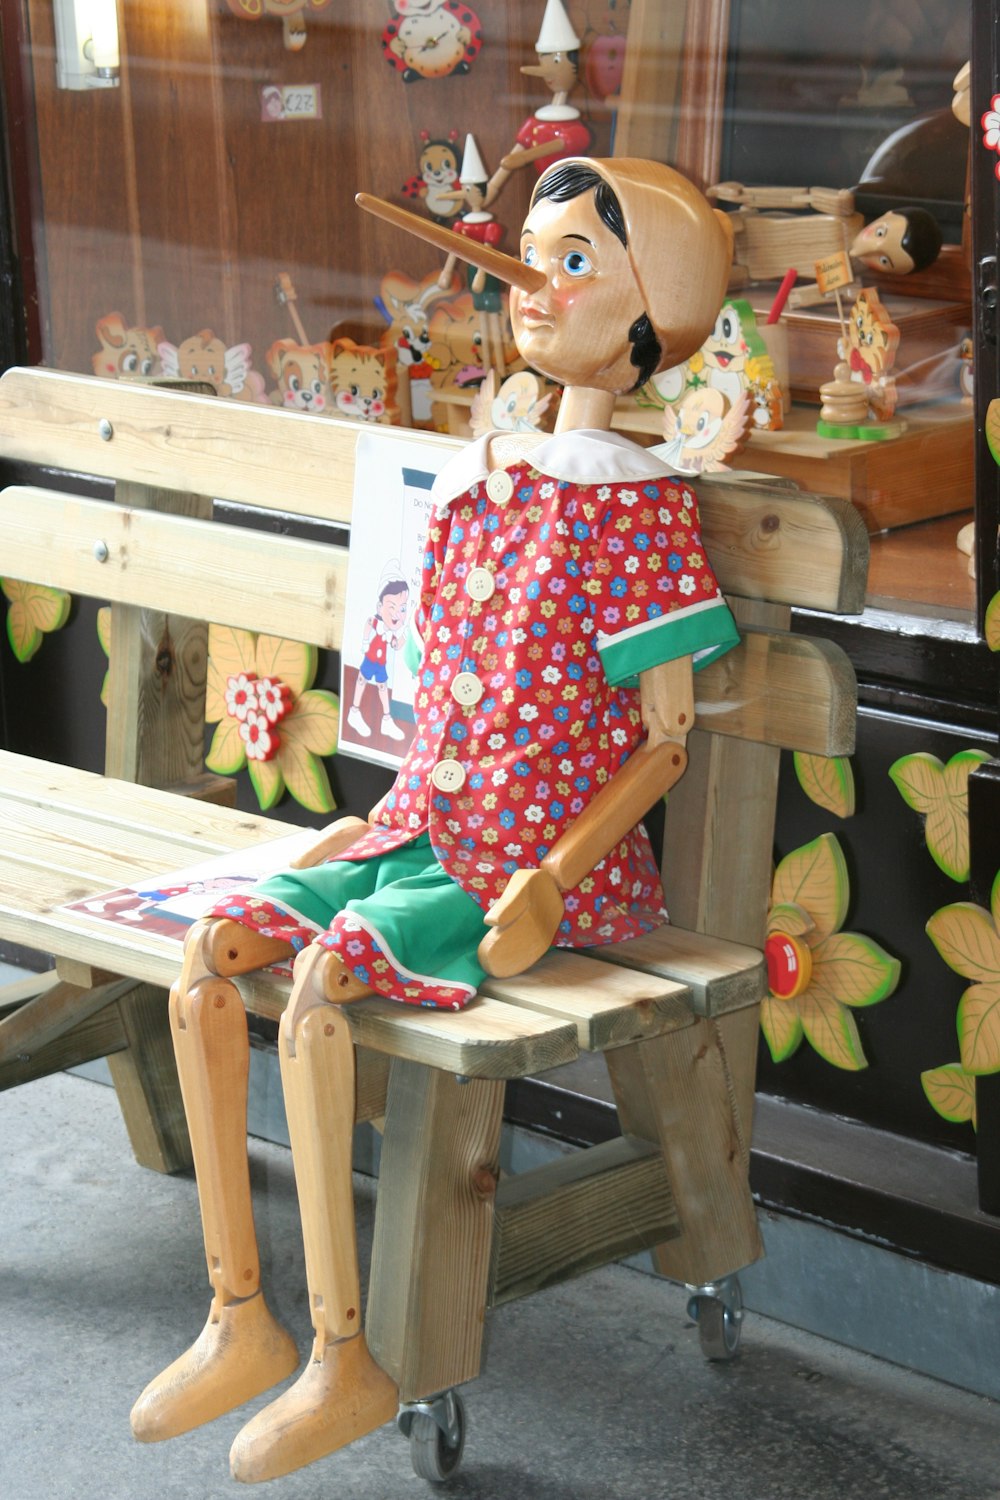 Pinocchio statue on wooden bench